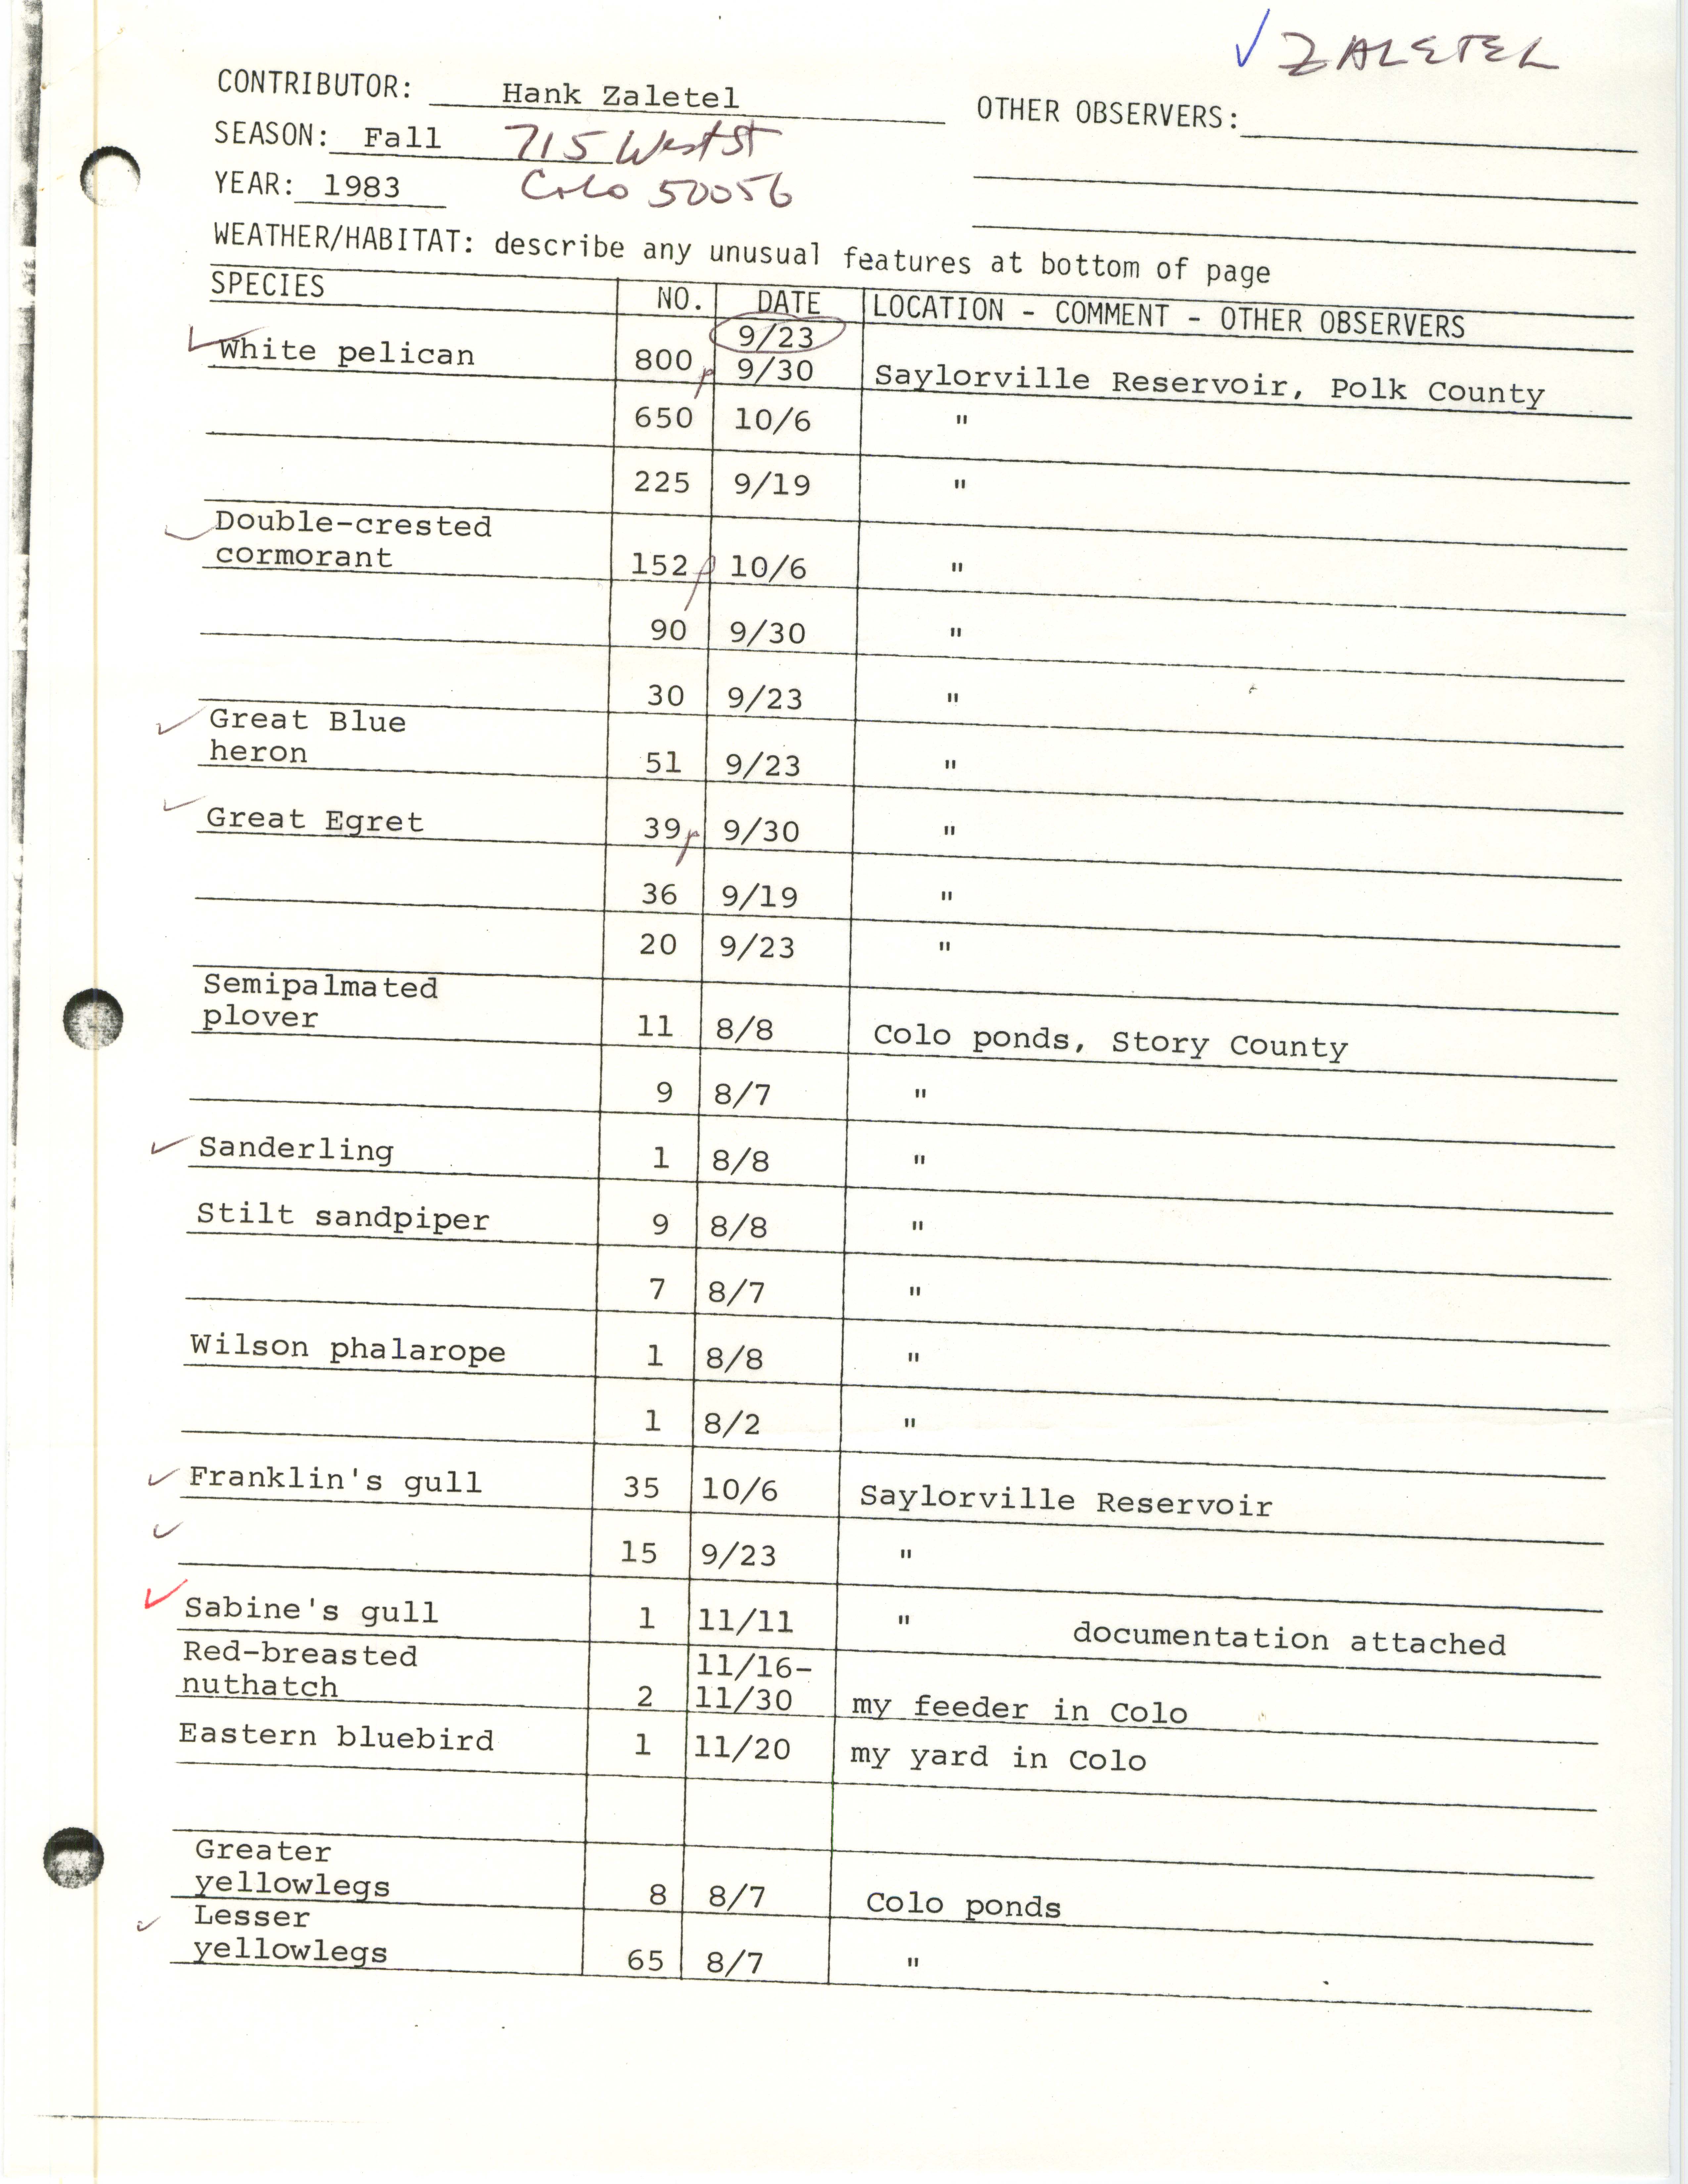 Annotated bird sighting list for fall 1983 compiled by Hank Zaletel